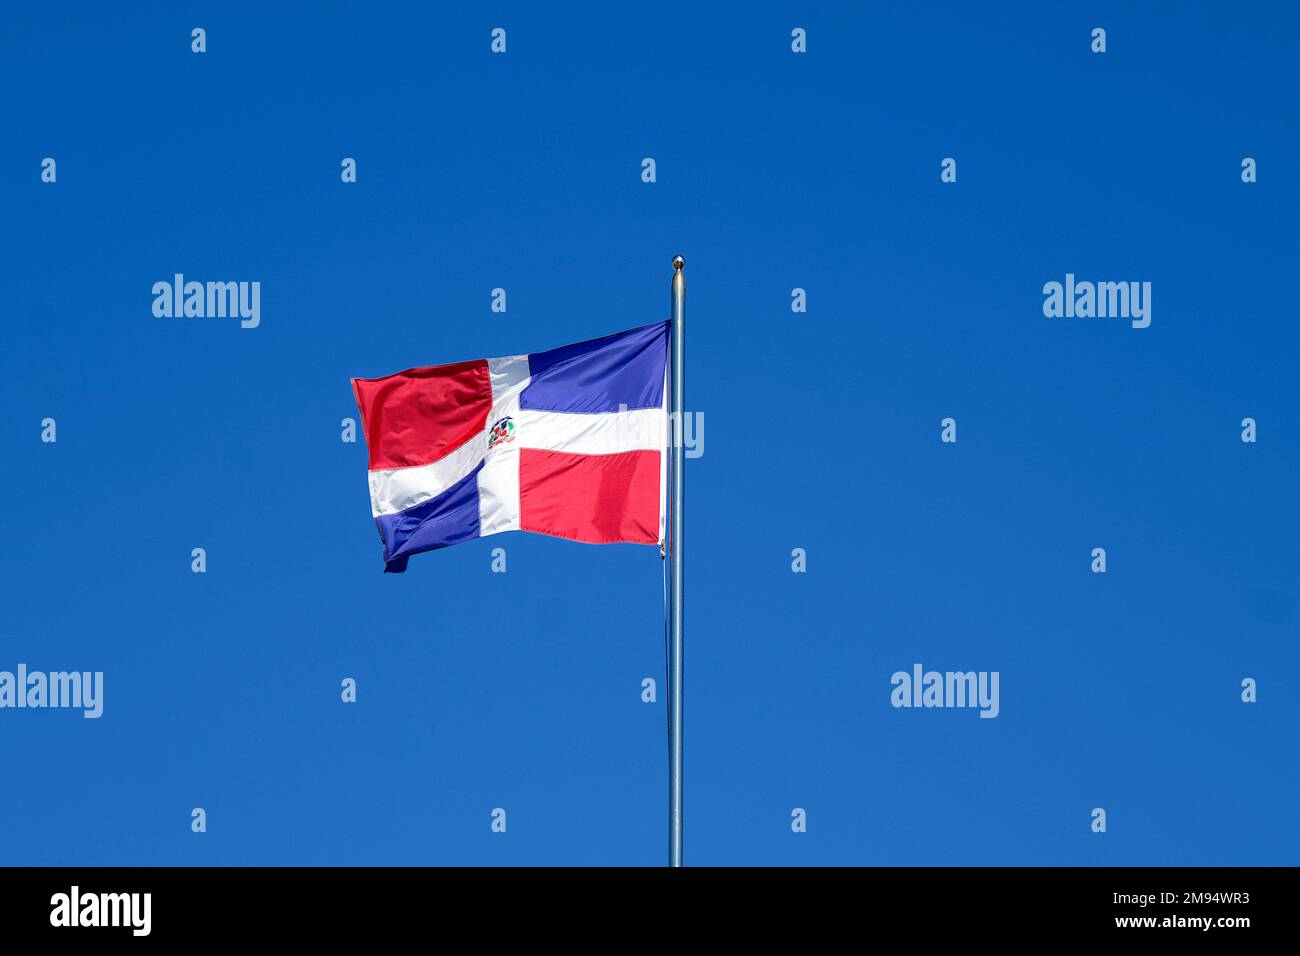 National flag of the Dominican Republic, Santo Domingo, Dominican Republic, Caribbean, Central America Stock Photo